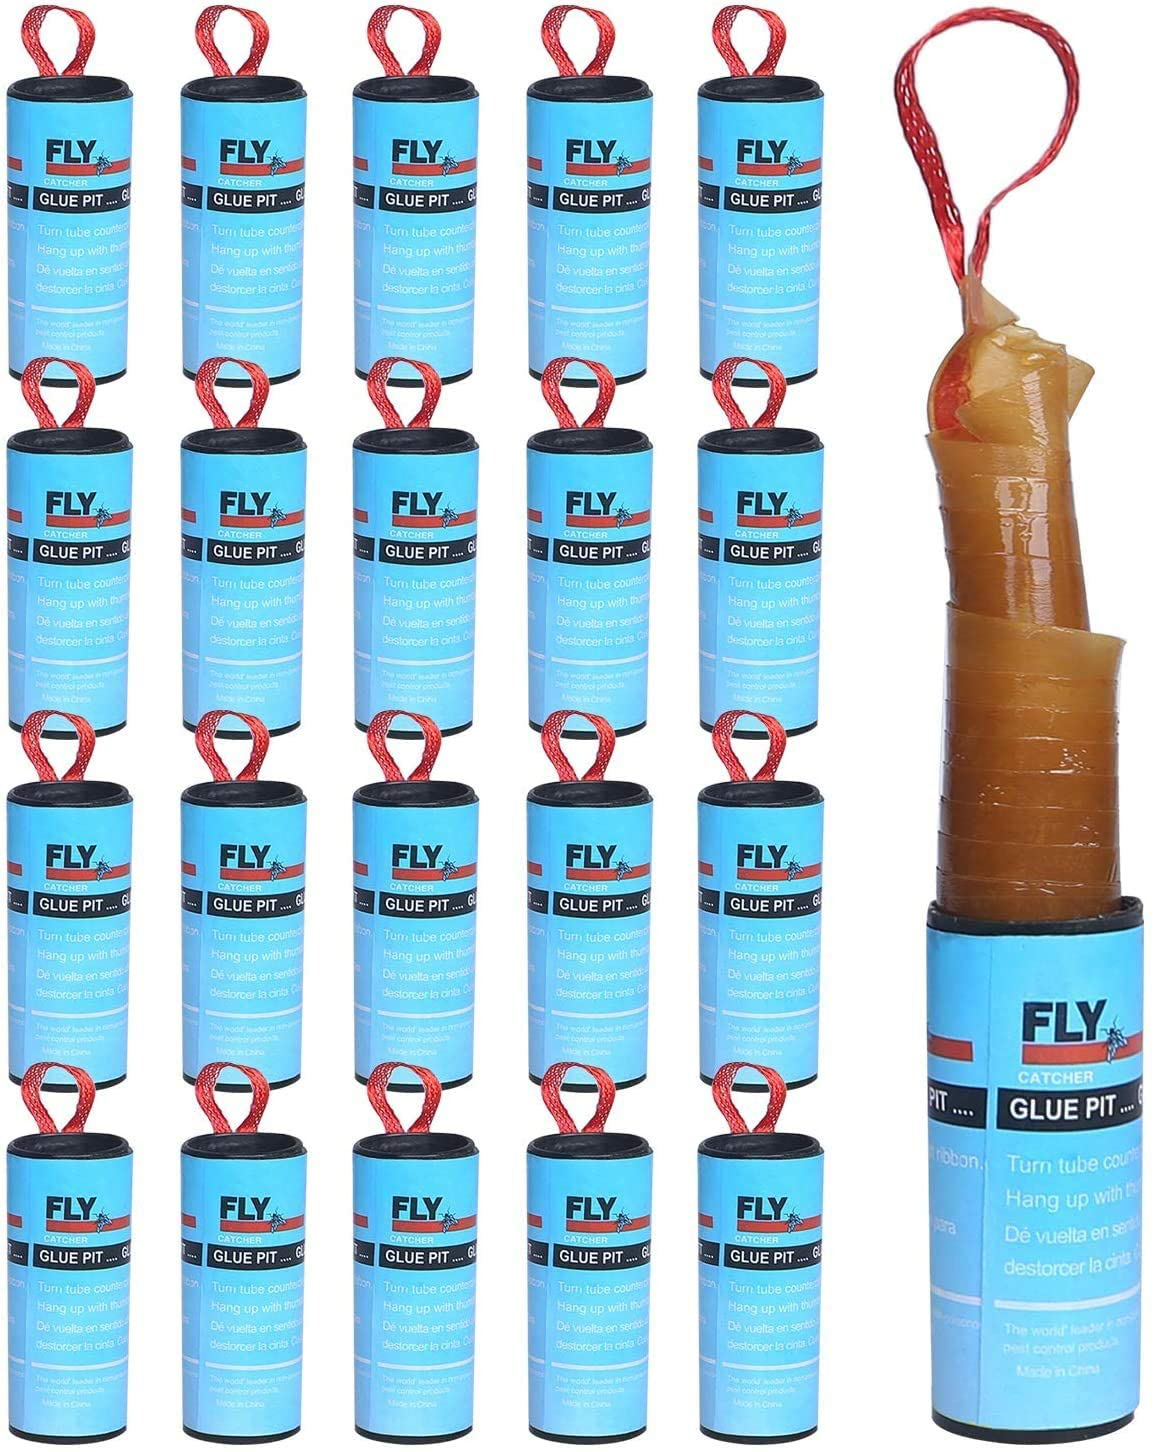 20 Rolls Fly Traps Indoor/Outdoor, Hanging Sticky Fruit Fly Strips Catcher Gnat Killer